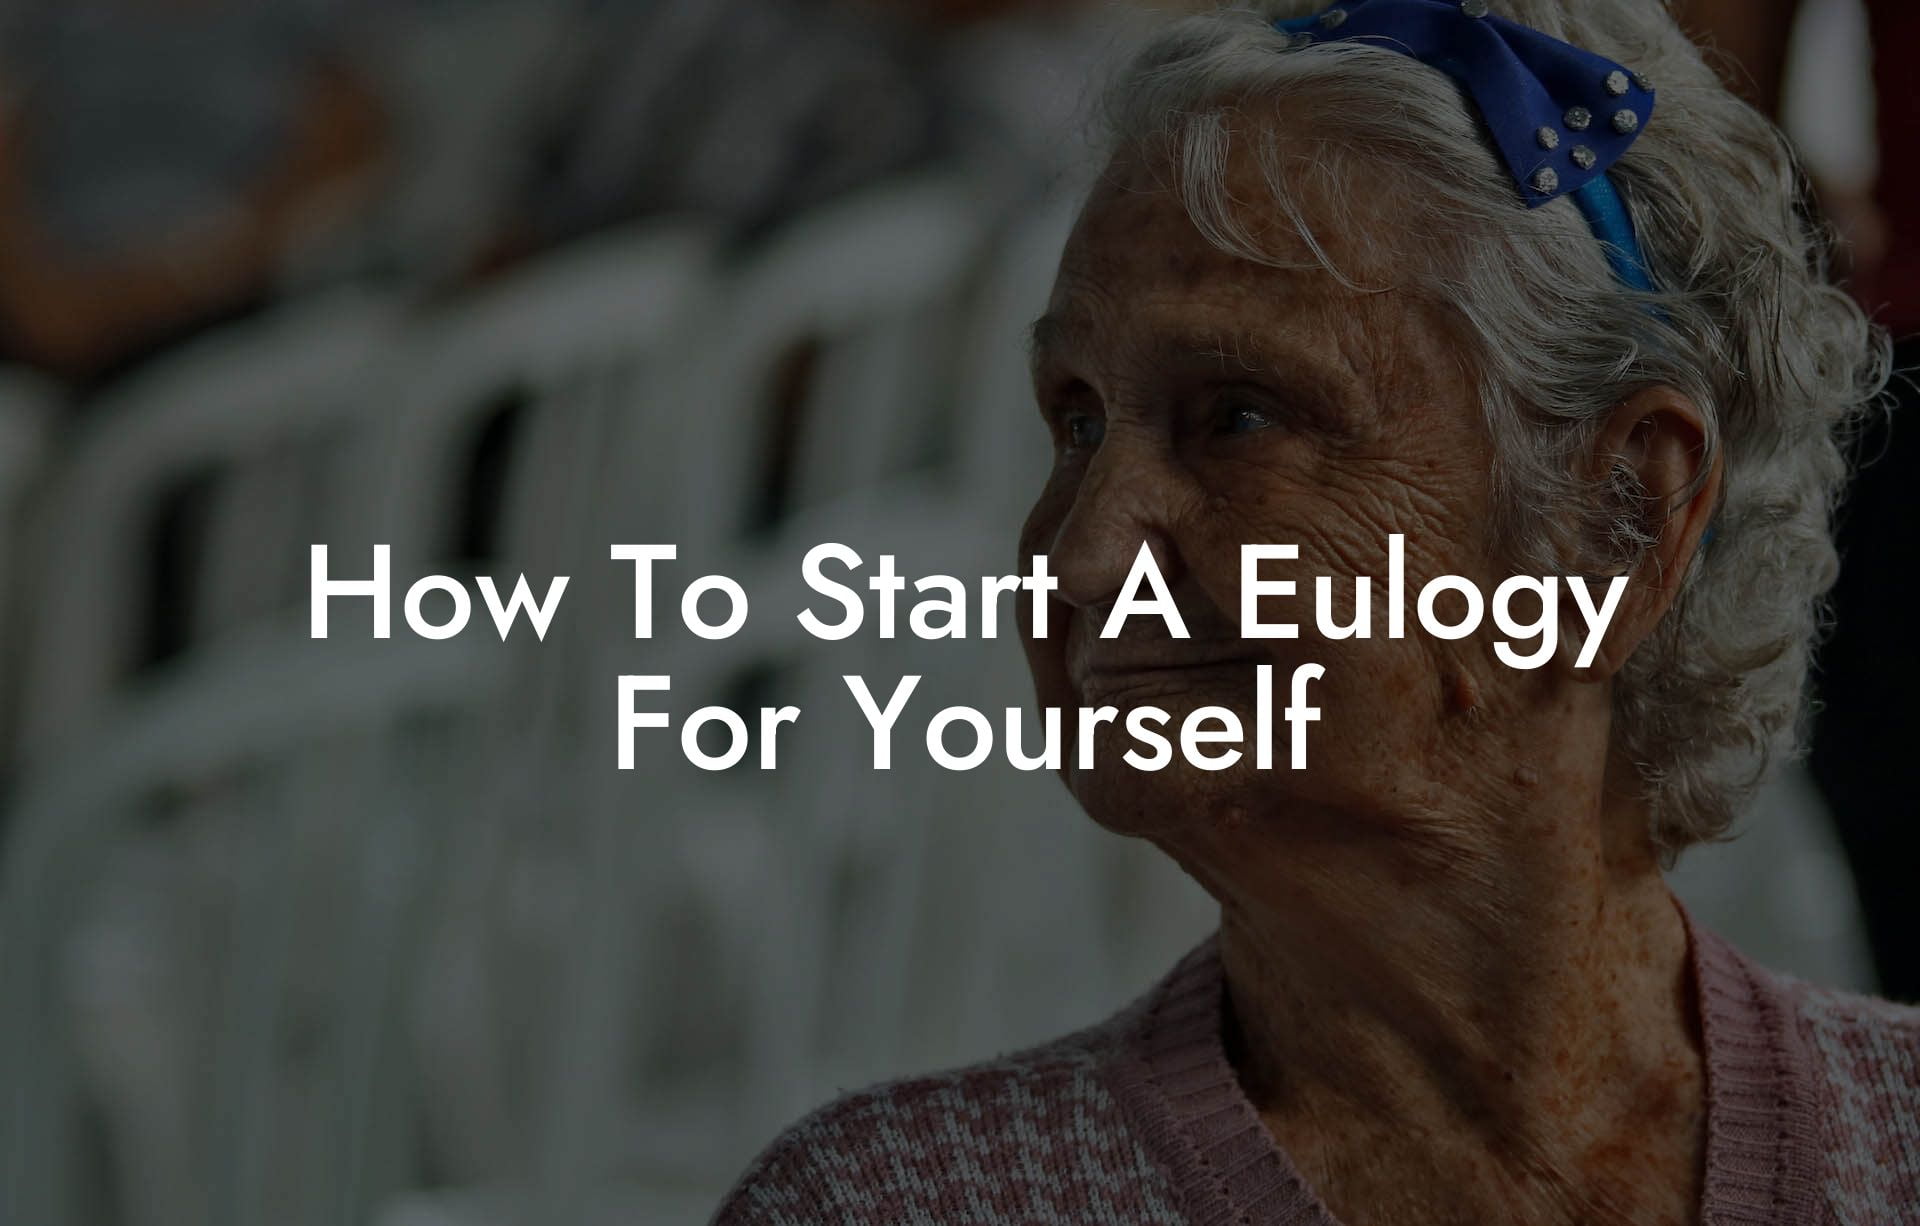 How To Start A Eulogy For Yourself